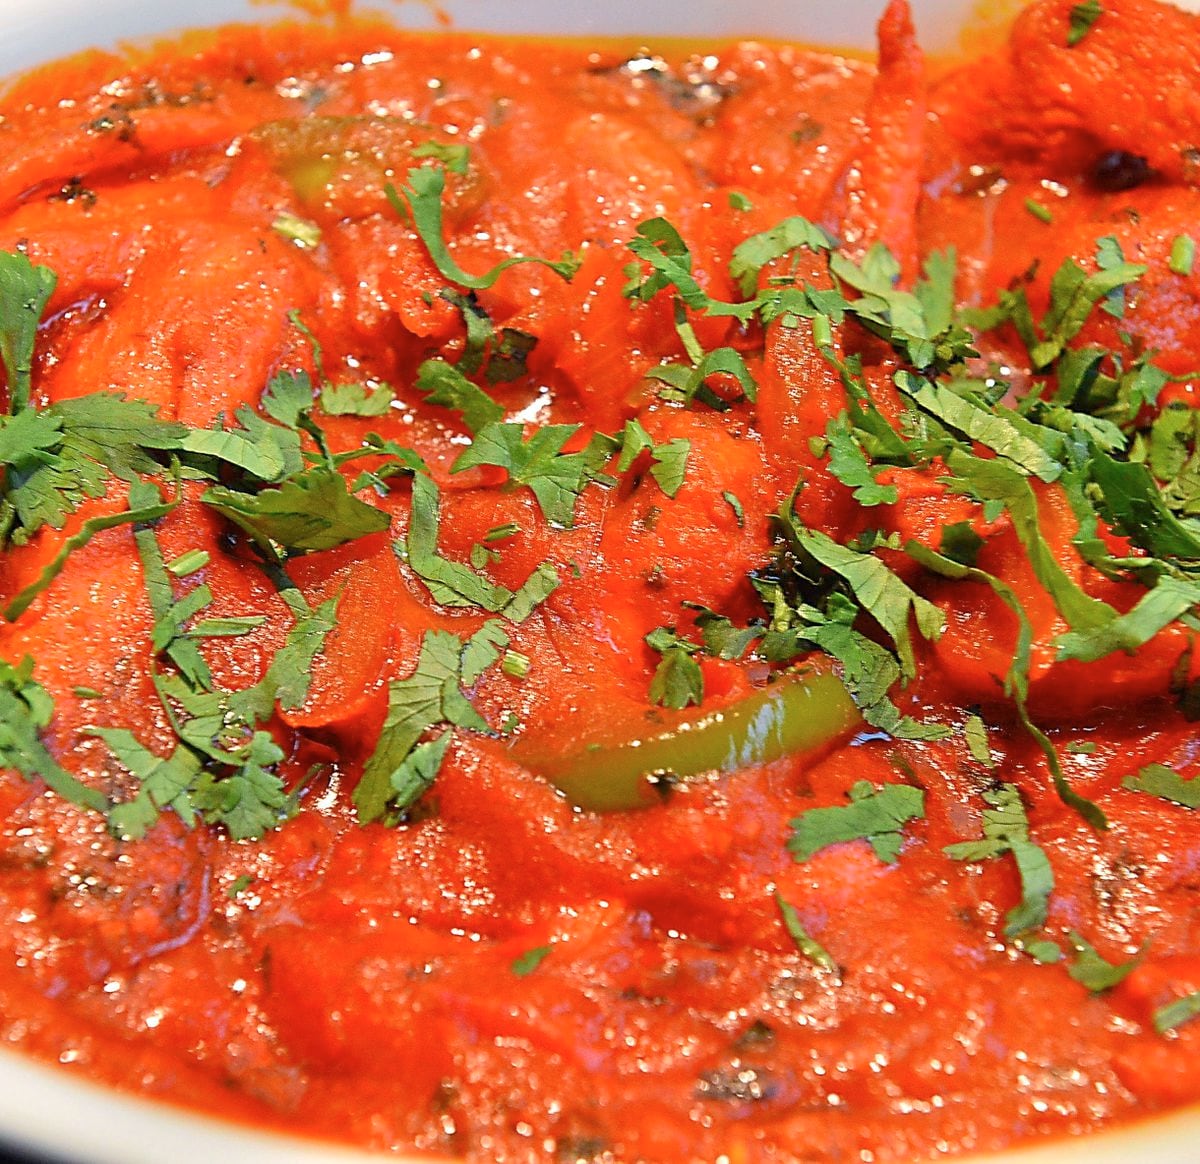 The spice is right – the chicken jalfrezi 